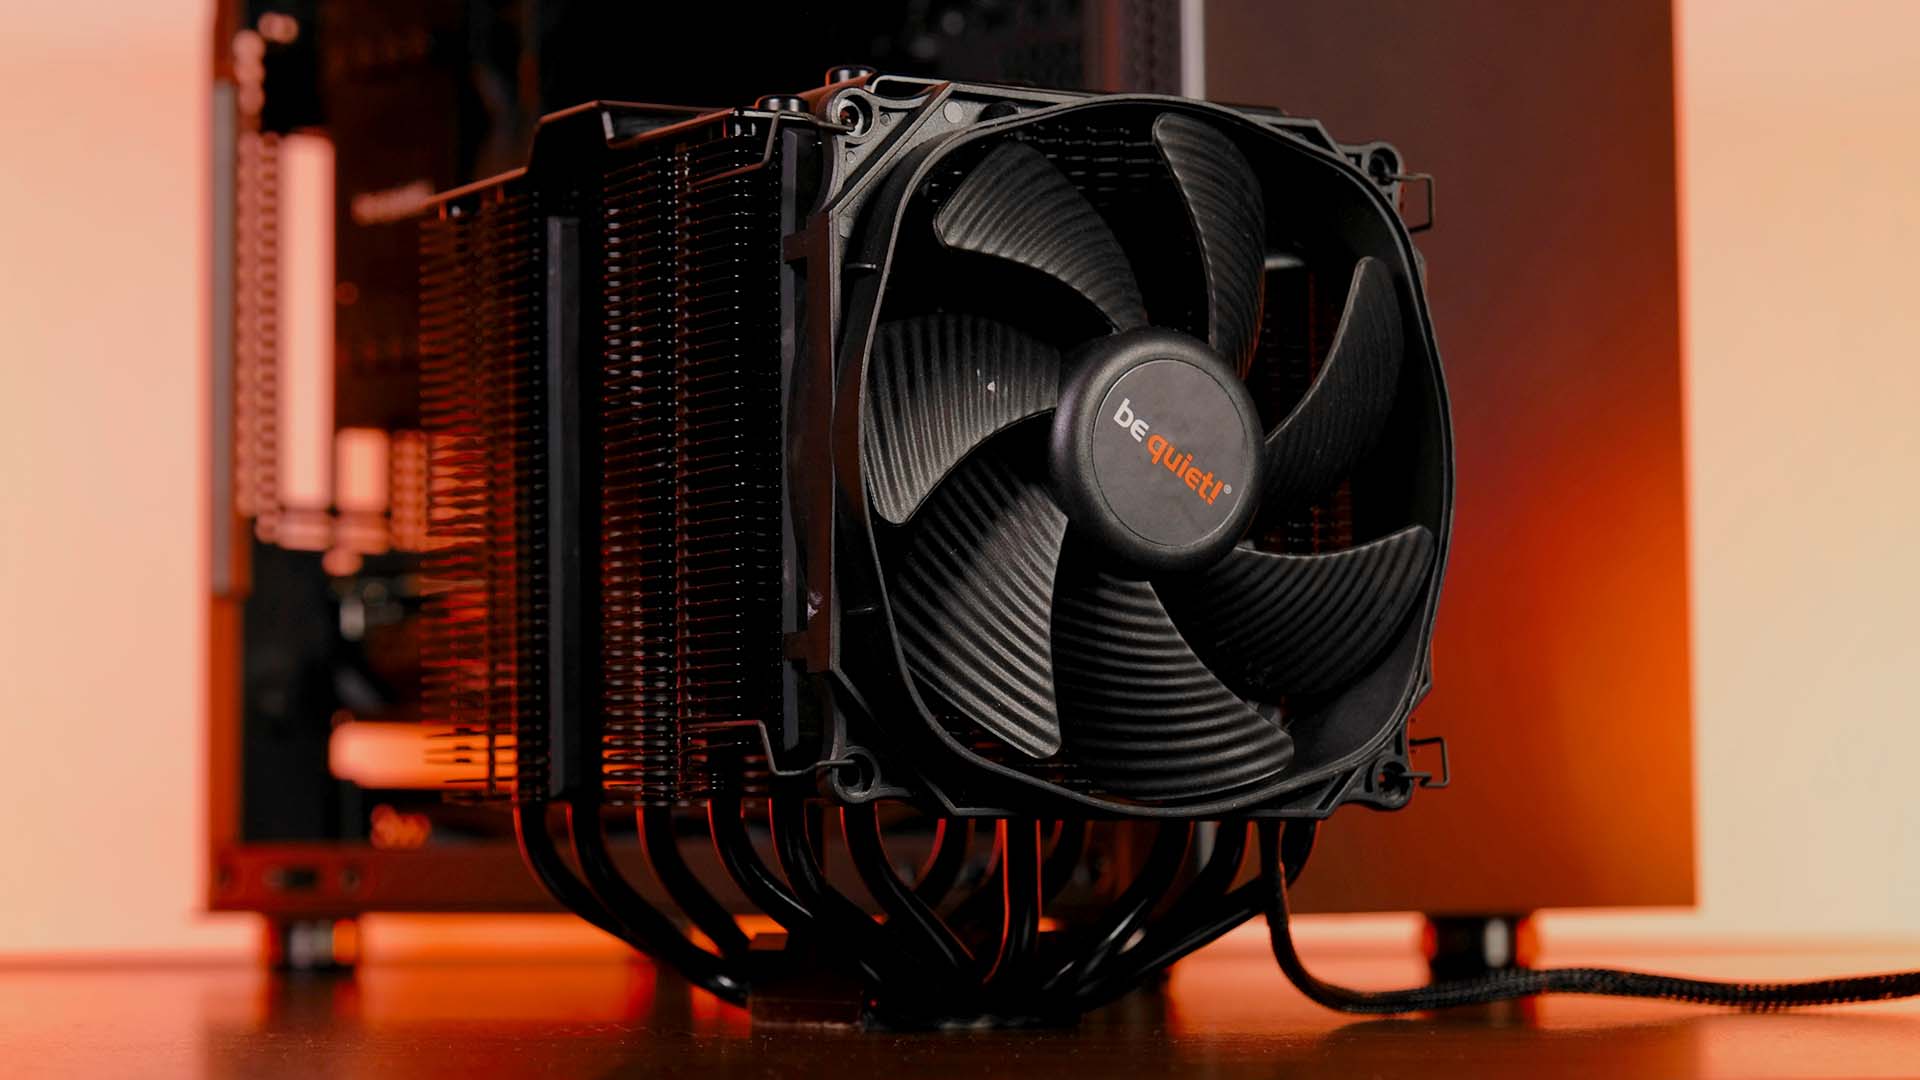 Be quiet! Dark Rock Pro 4 review: Insane CPU cooling performance